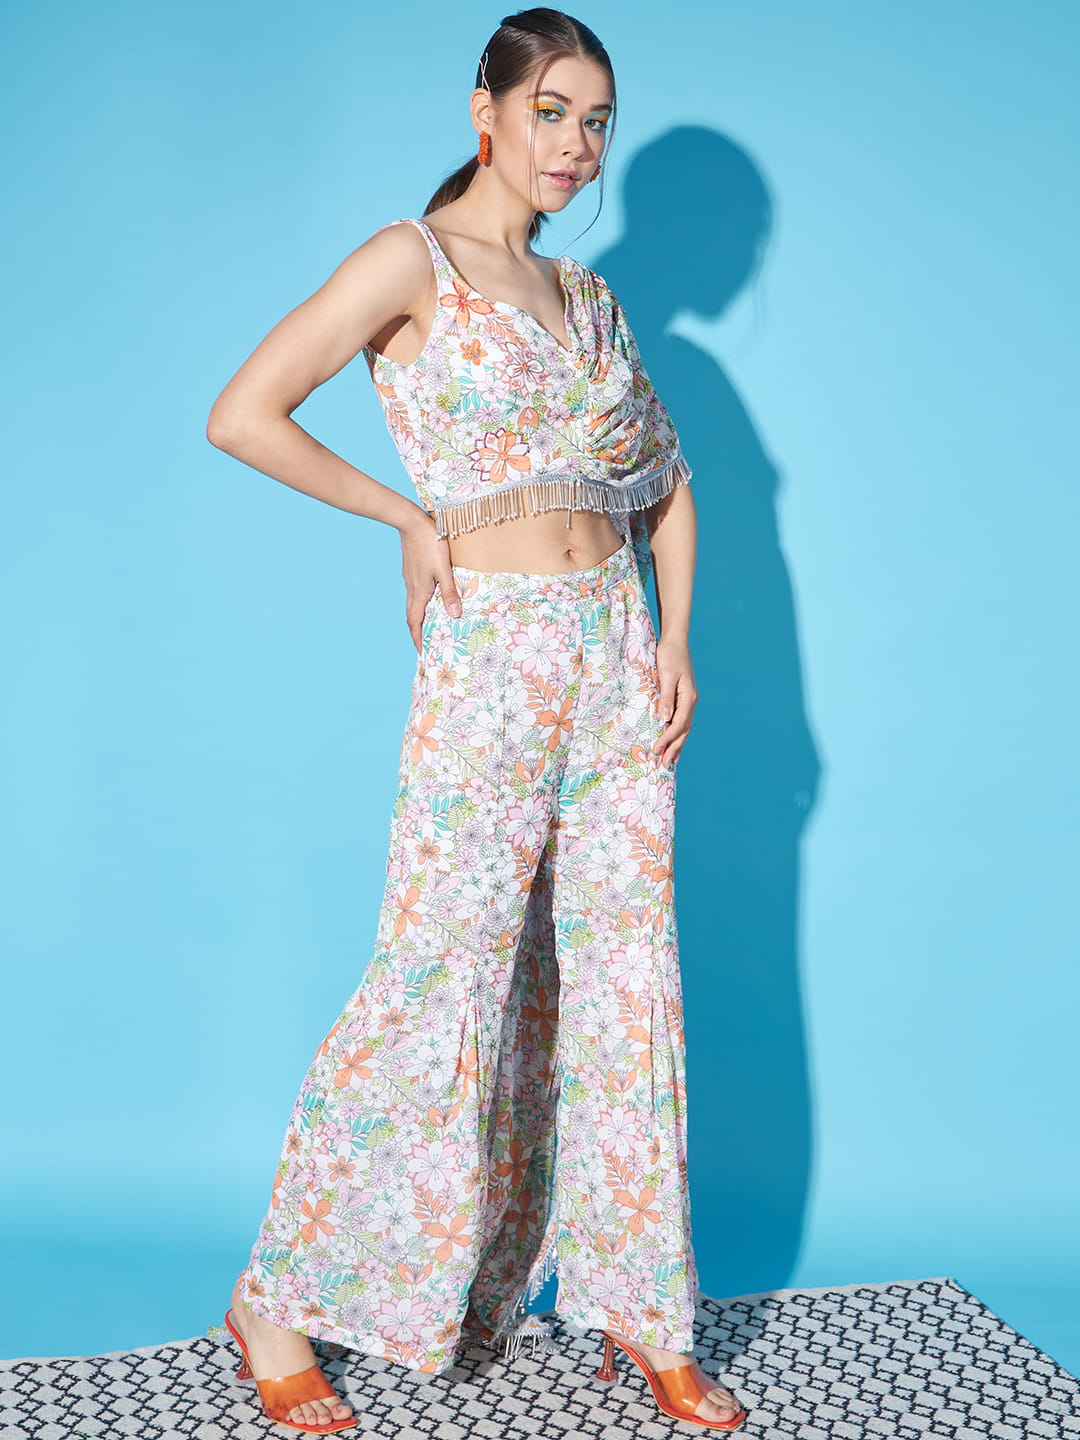 Ethereal Blooms: White Floral Fusion Coord Set in Drape Style | Hues of India